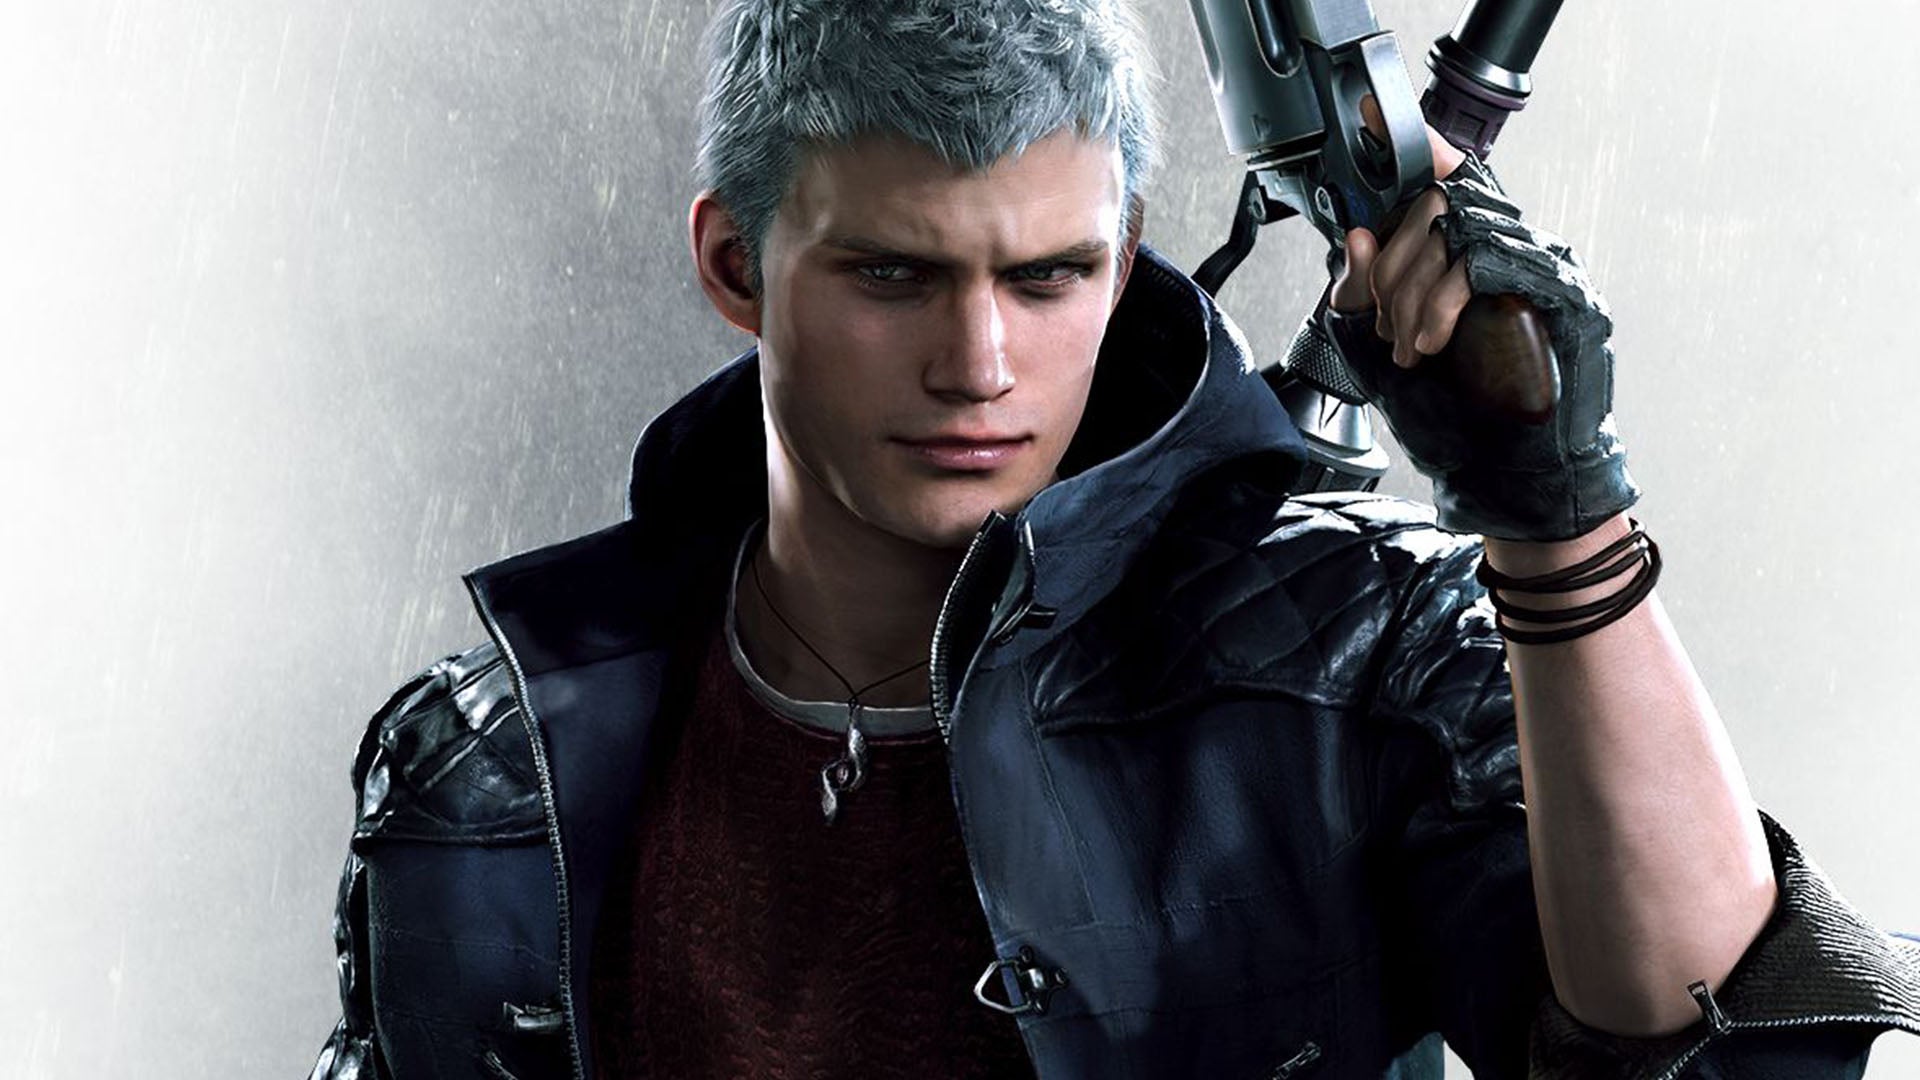 Image for Devil May Cry 5 Xbox One X First Look!